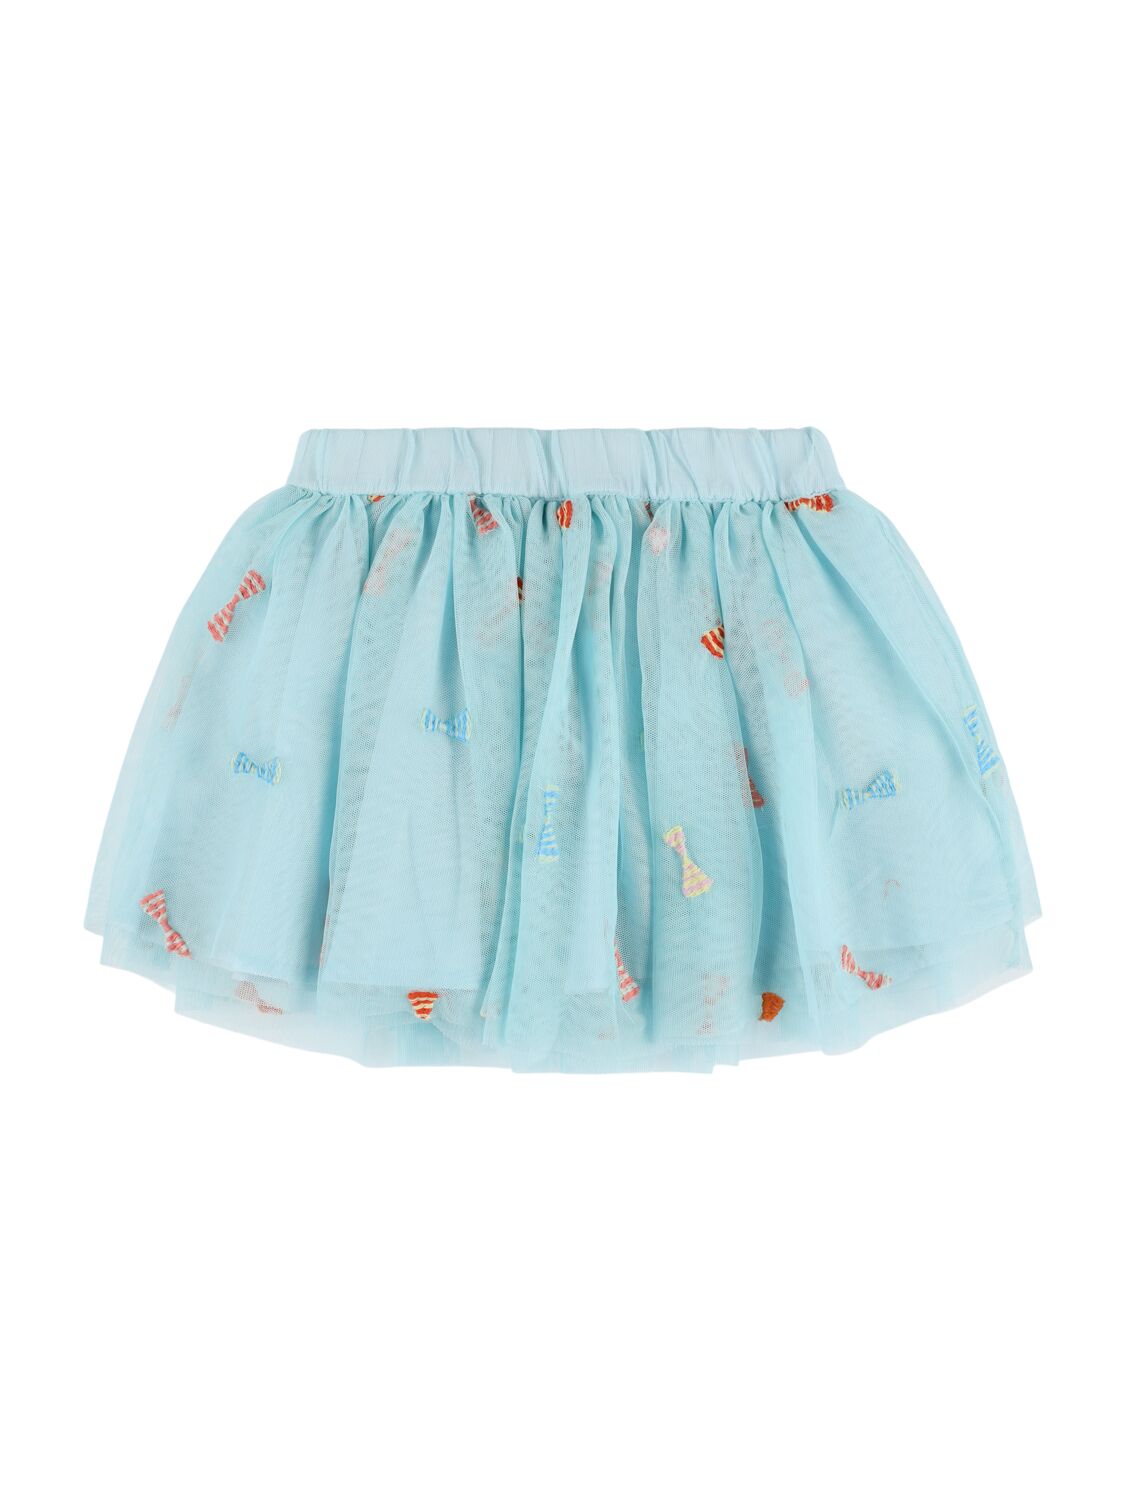 Image of Recycled Tulle Skirt W/bows